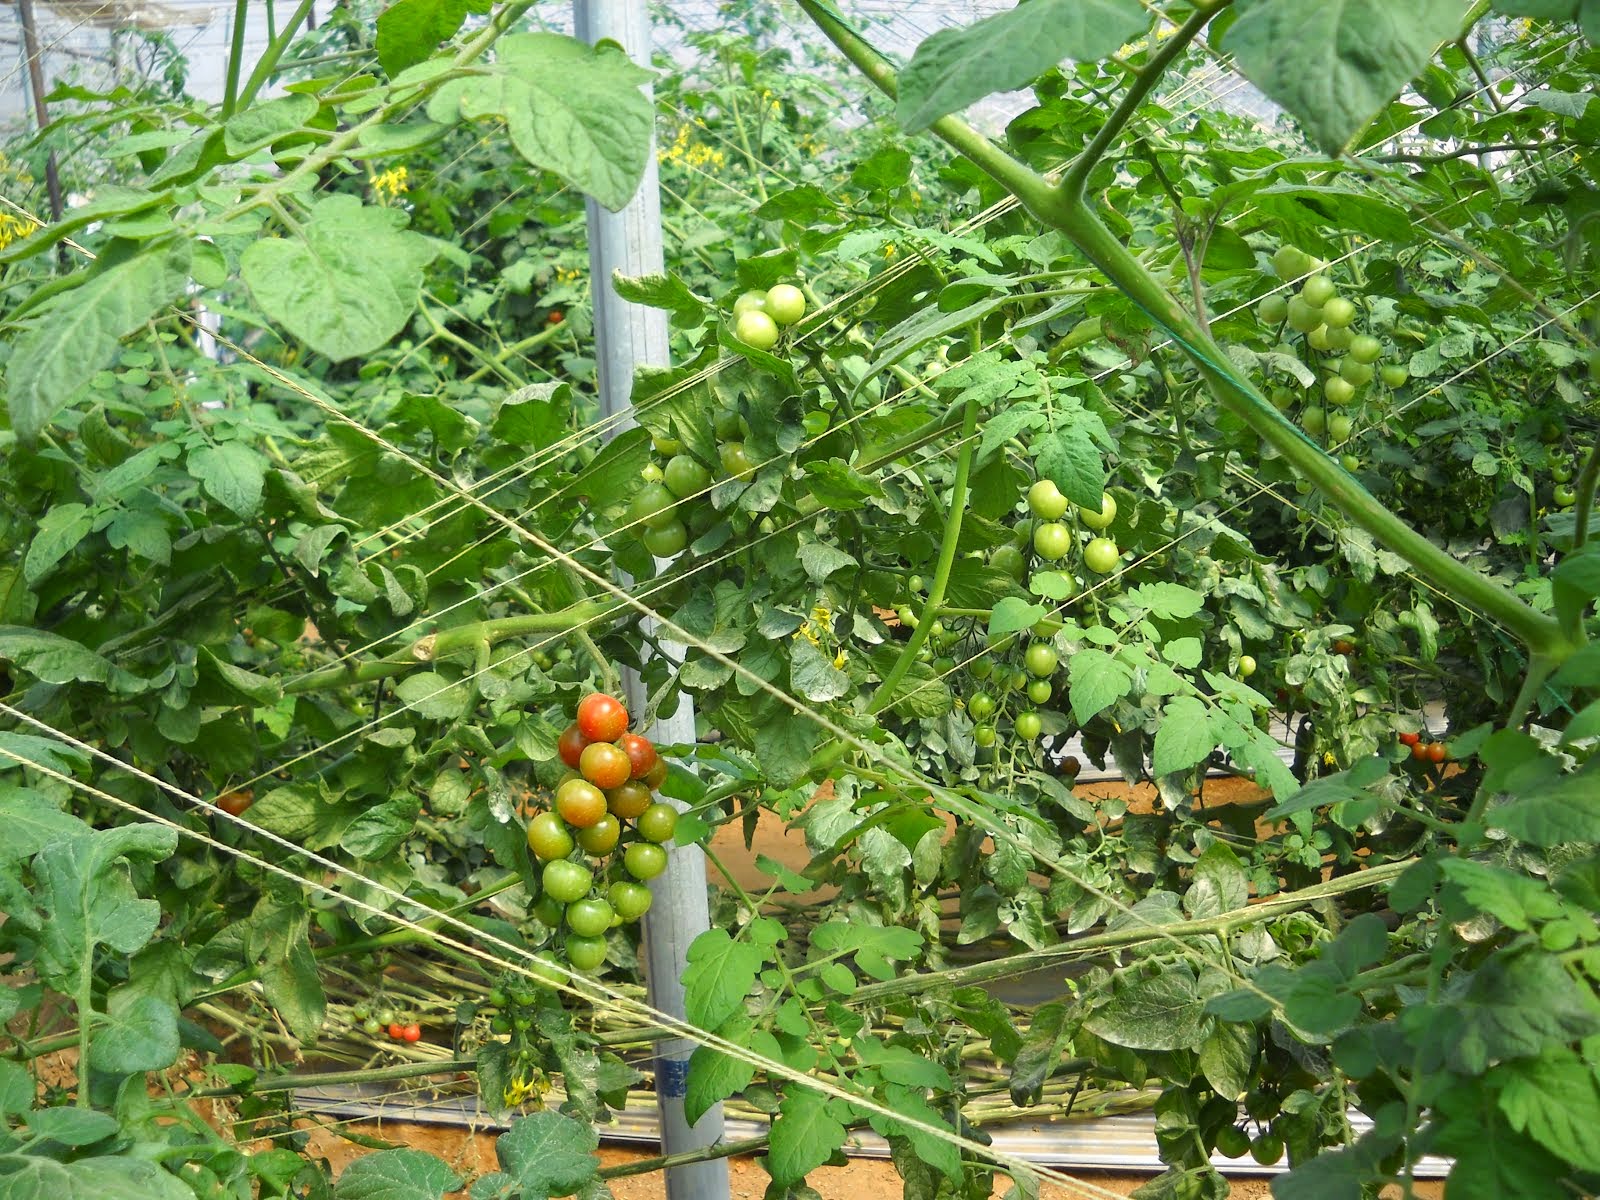 FILED BY GREEN HOUSE CHERE TOMATO